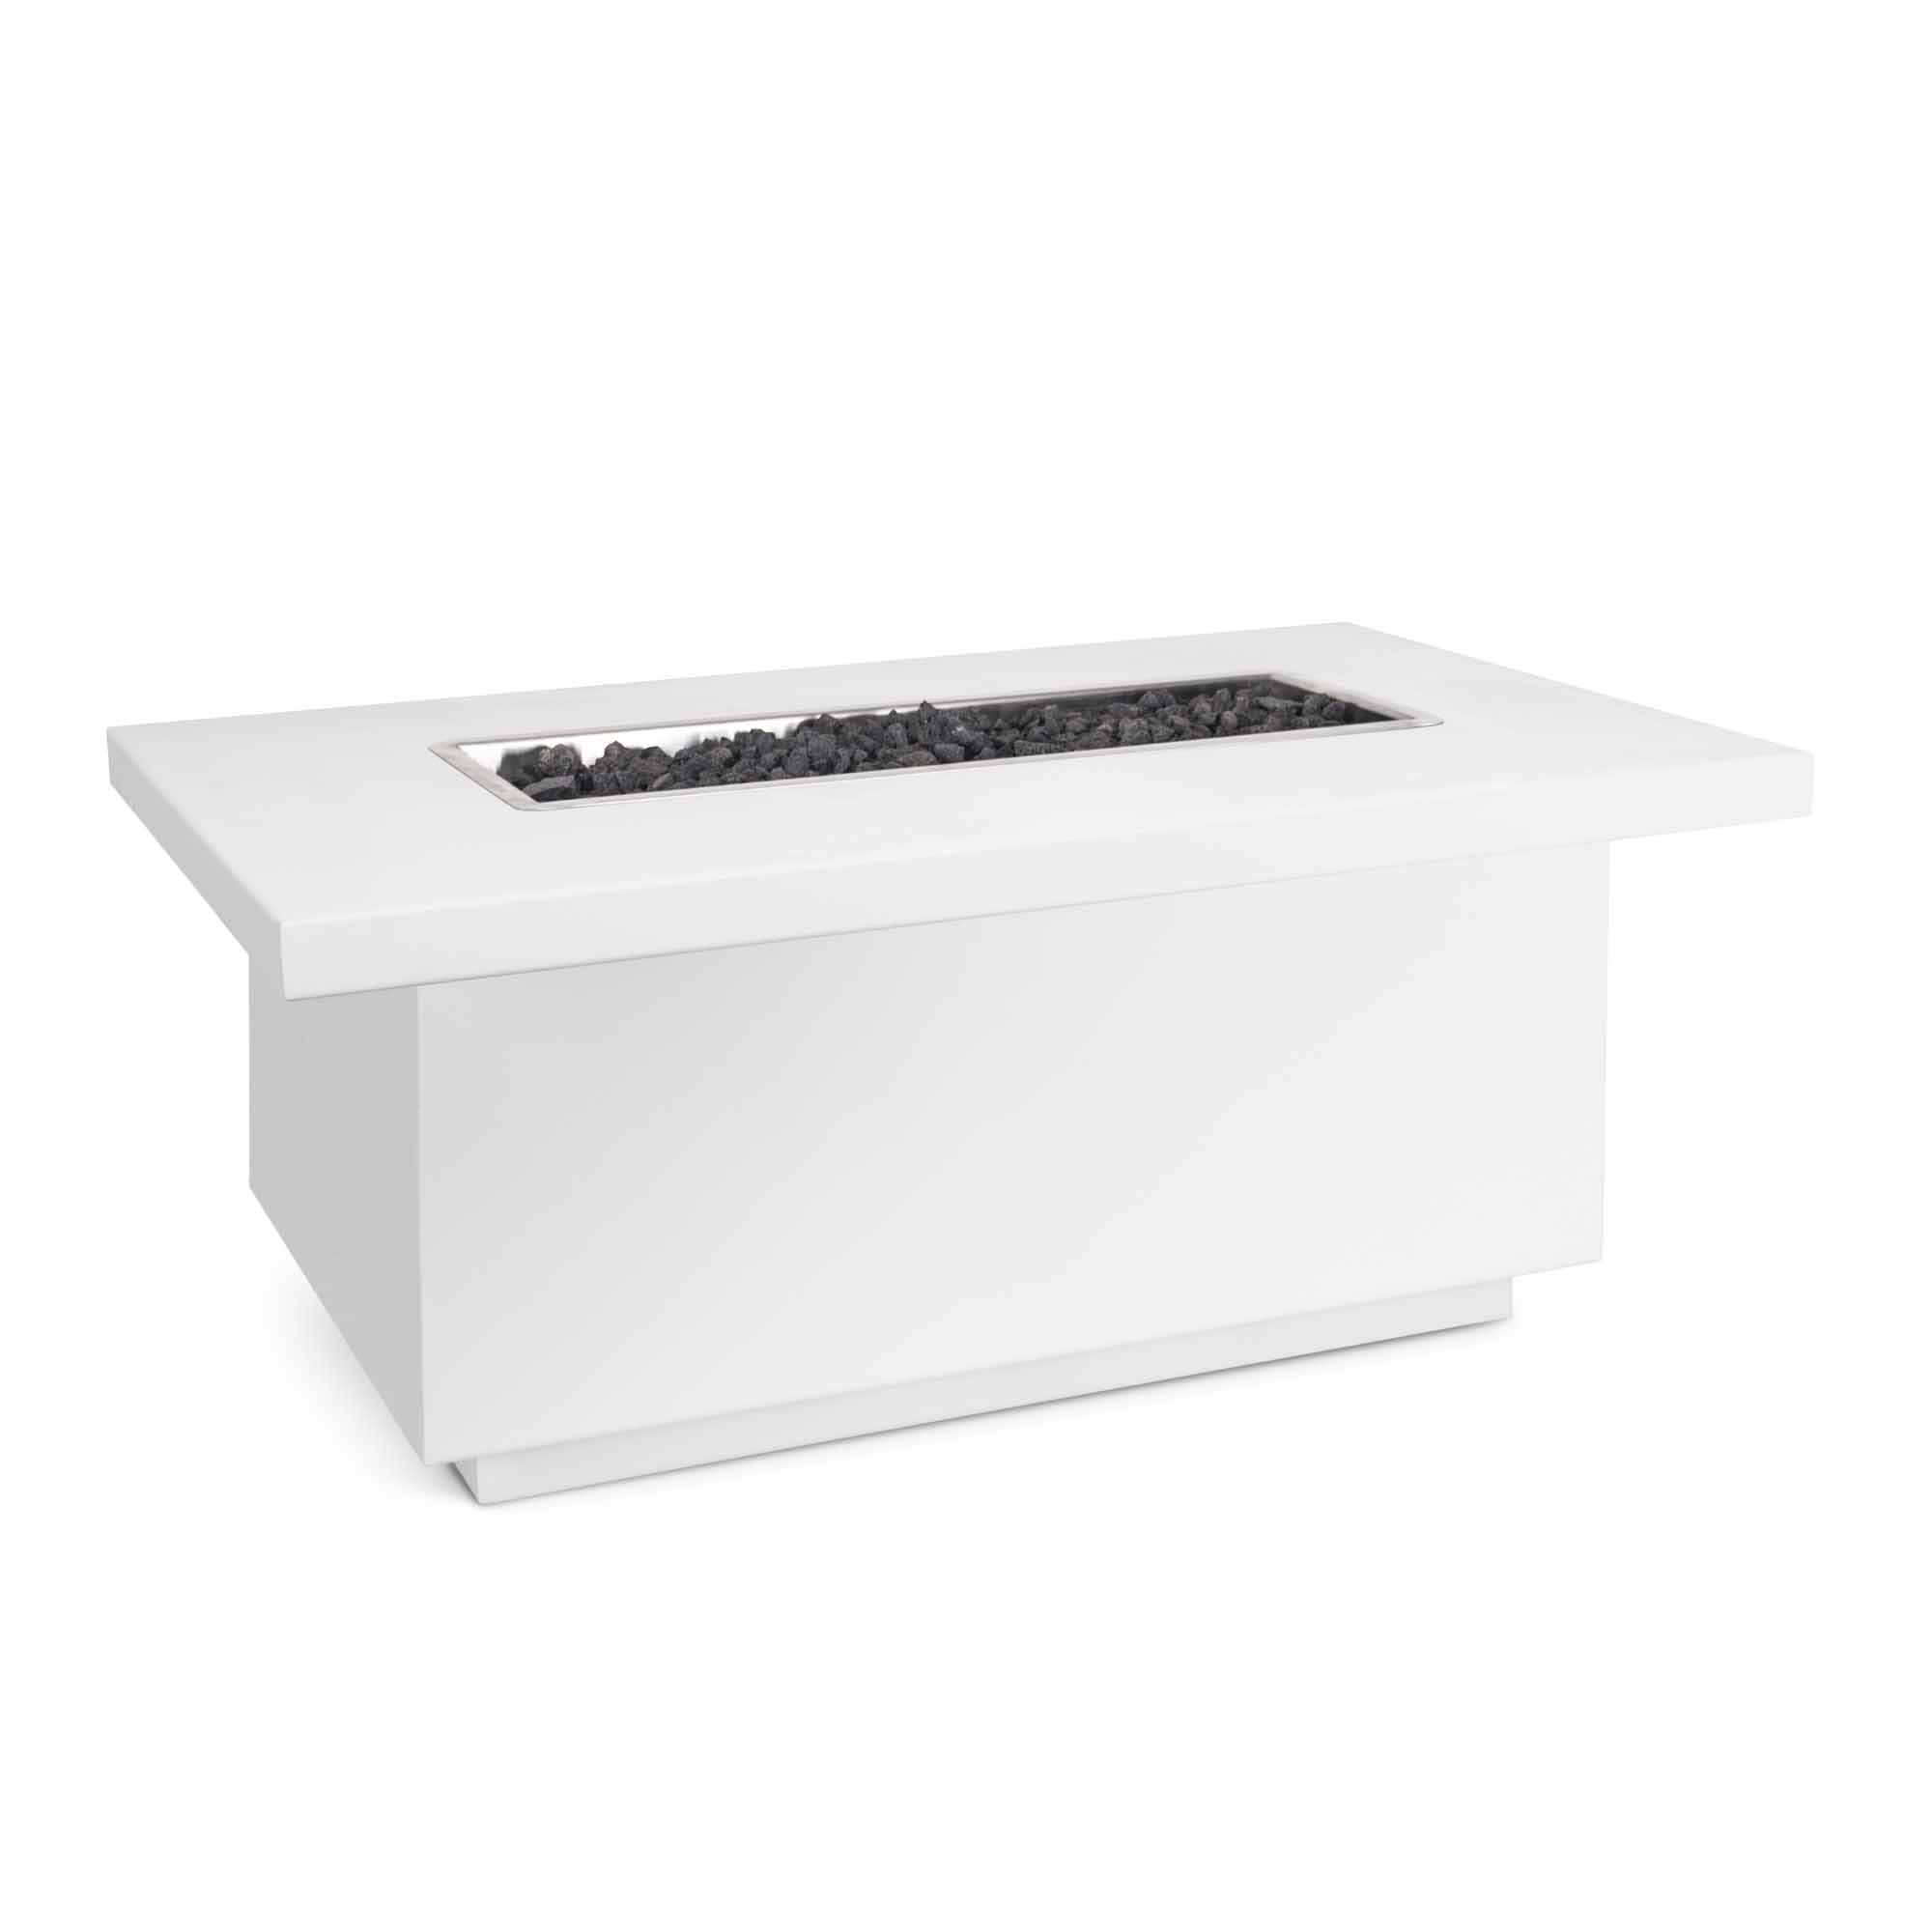 Fremont Fire Table - White - 24 Tall